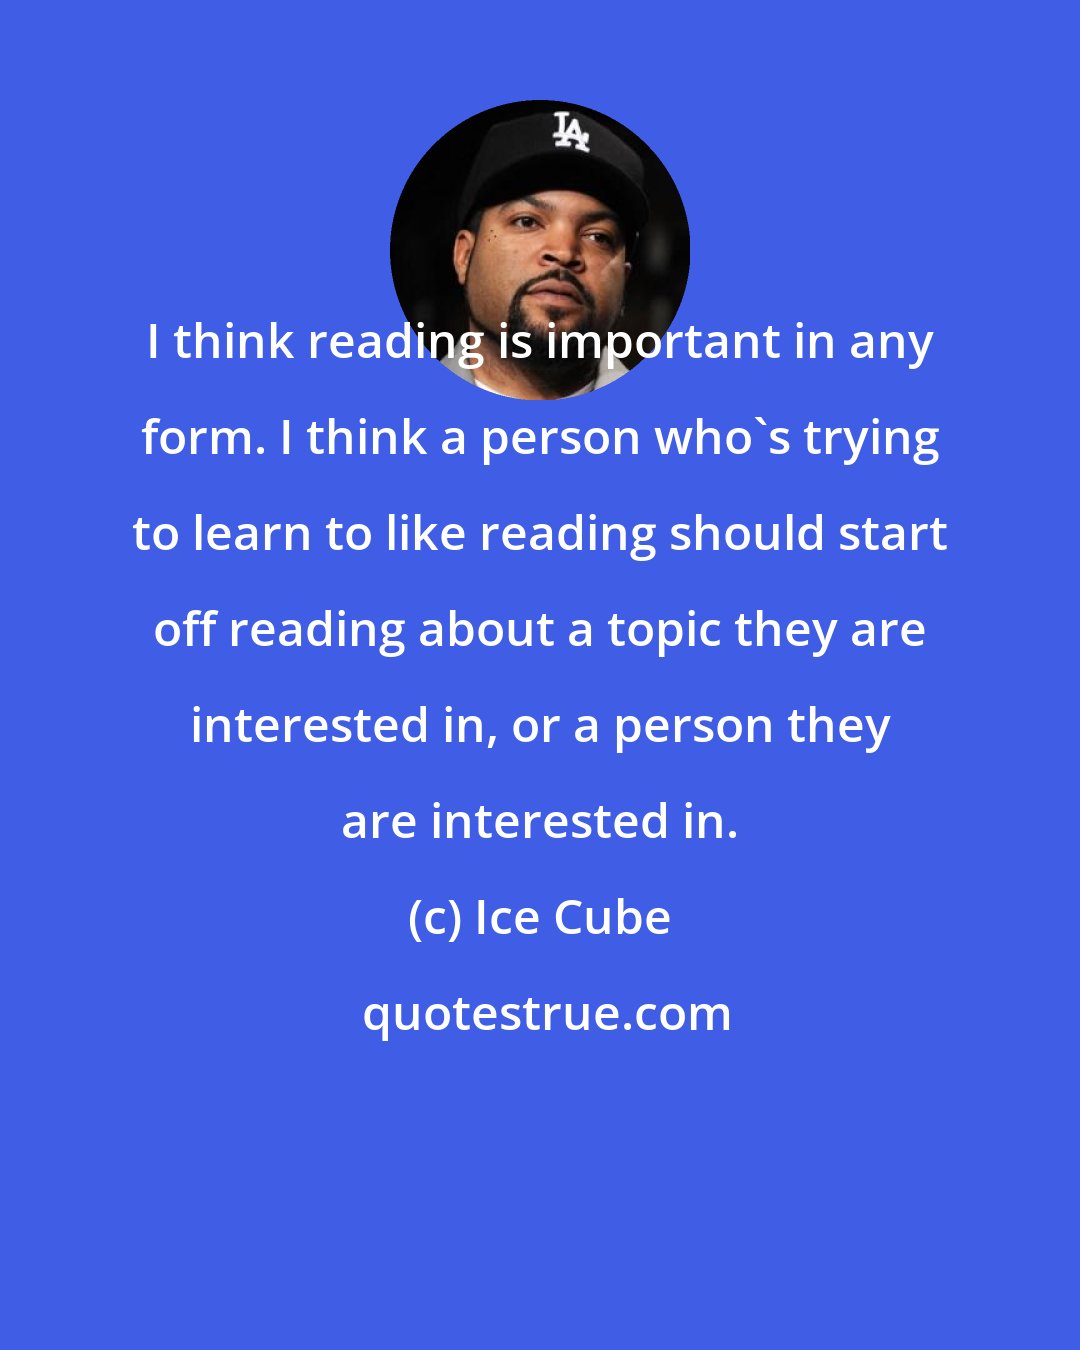 Ice Cube: I think reading is important in any form. I think a person who's trying to learn to like reading should start off reading about a topic they are interested in, or a person they are interested in.